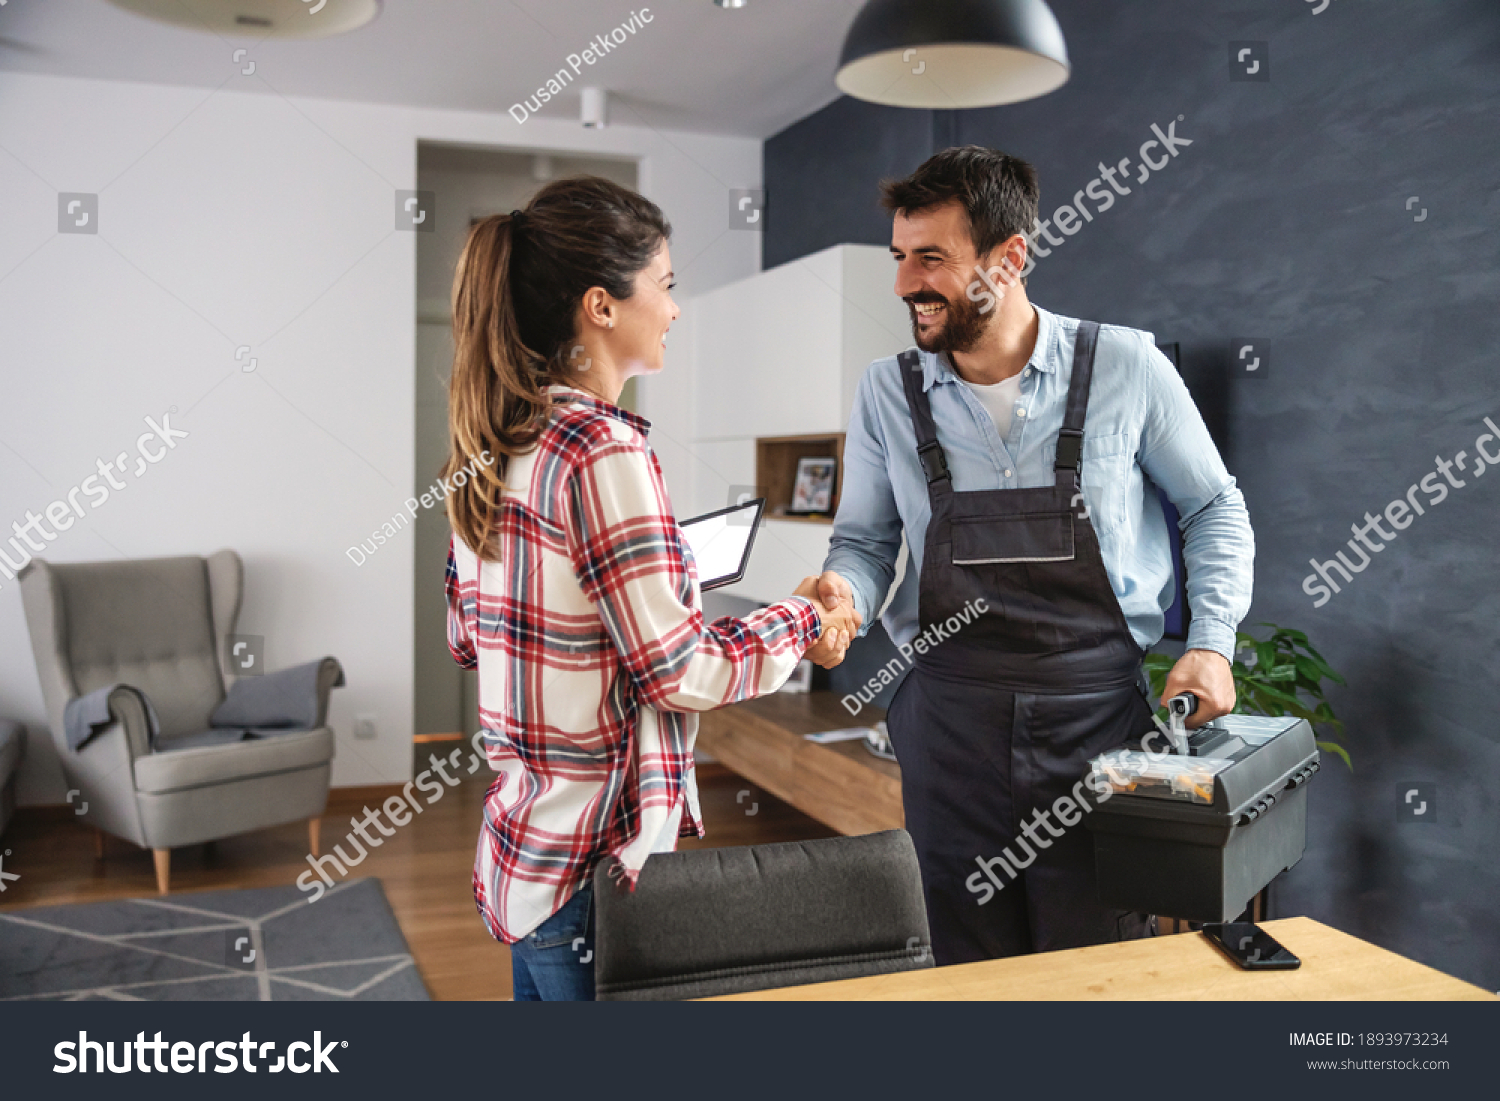 Happy woman shaking hands with repairman. Home interior. #1893973234